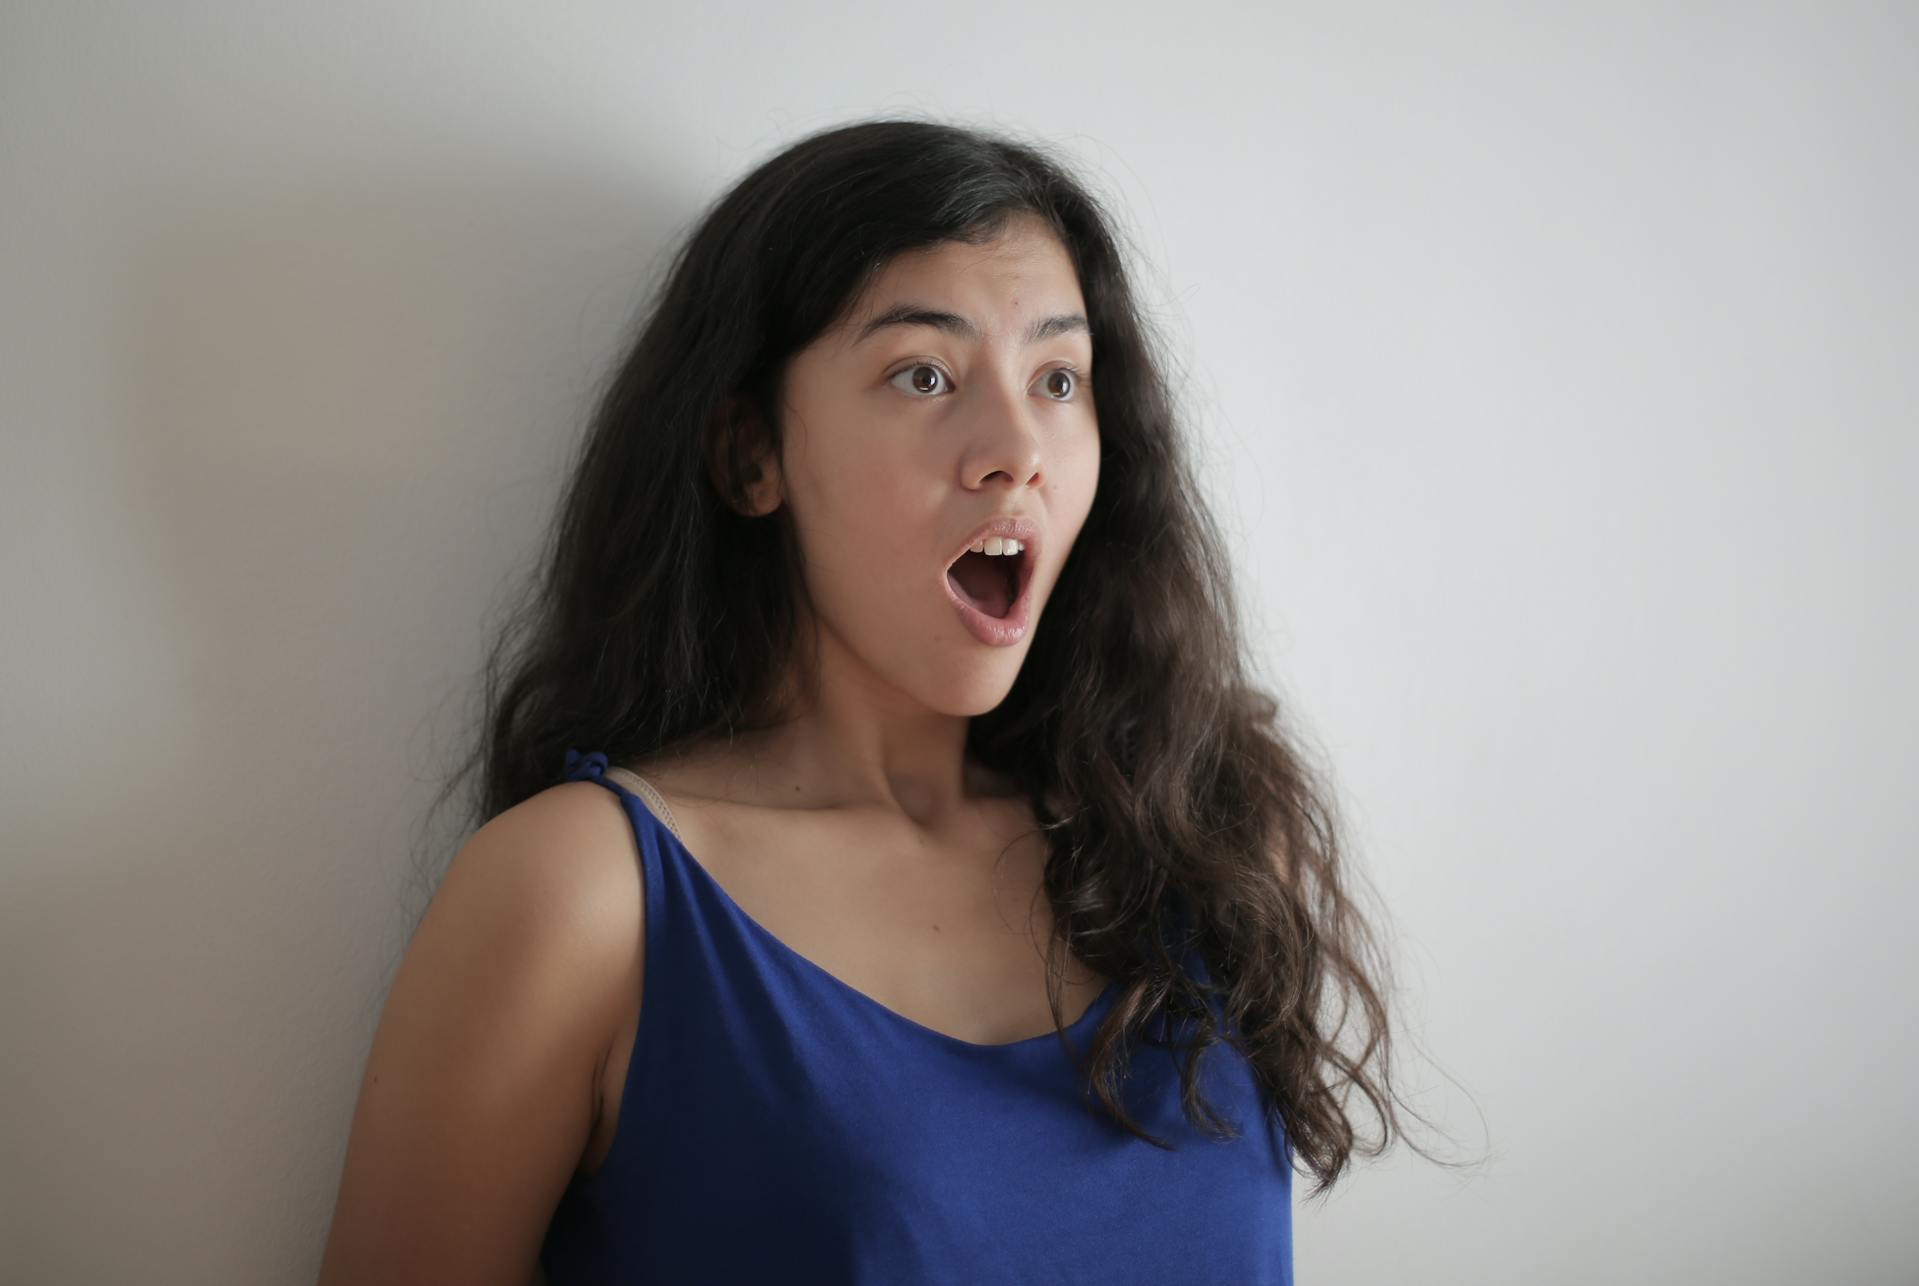 A shocked woman standing against a wall | Source: Pexels